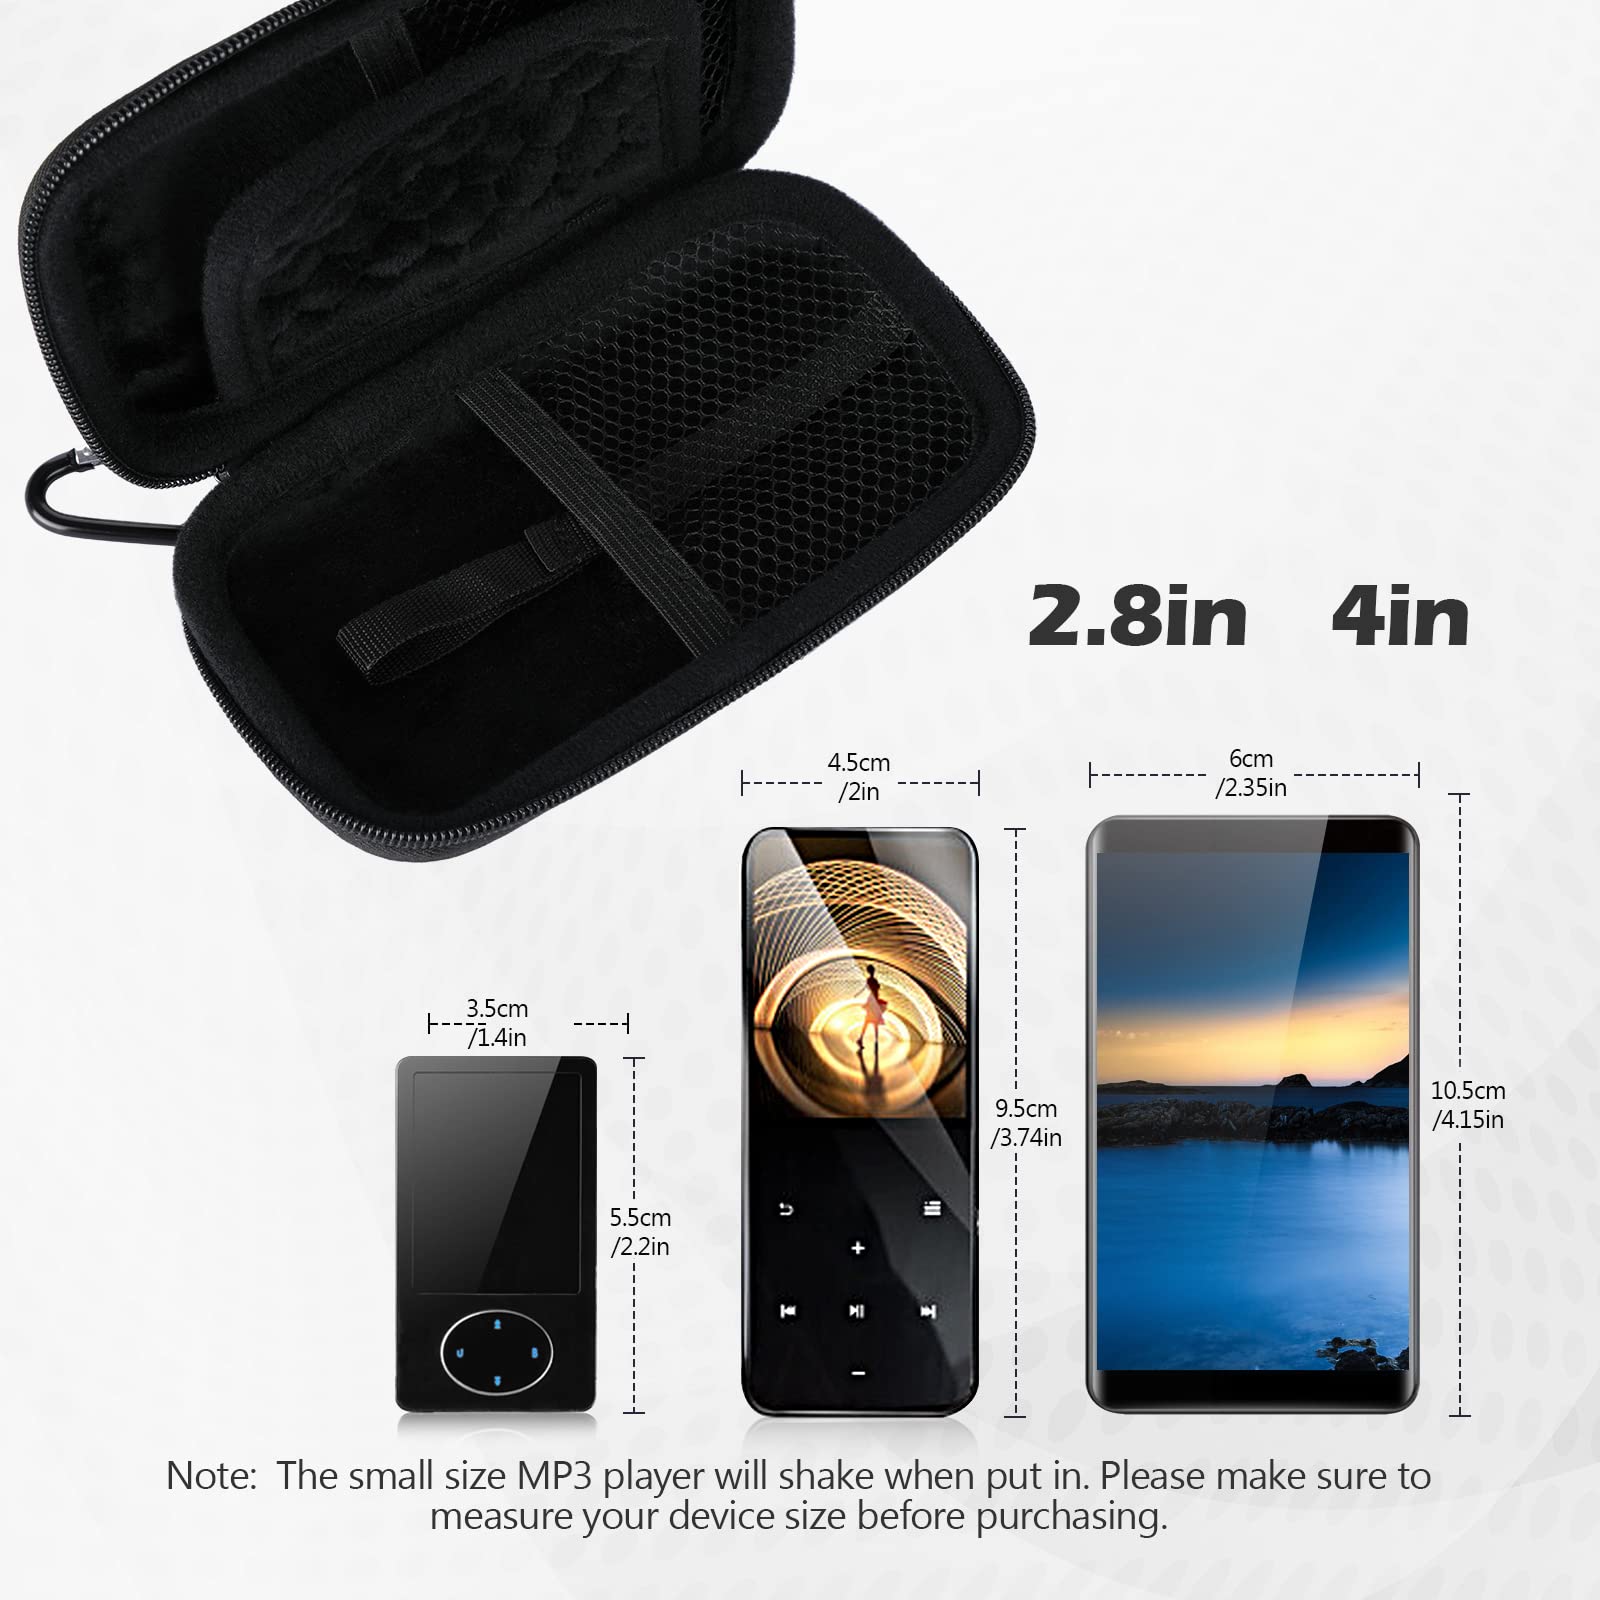 AGPTEK MP3 MP4 Player Case for 4 inch MP3 Music Player, Compatible with AGPTEK, innioasis, MYMAHDI, TIMMKOO, Luoran and other MP3 Players under 4 inch, Portable Carrying Case with Metal Carabiner Clip